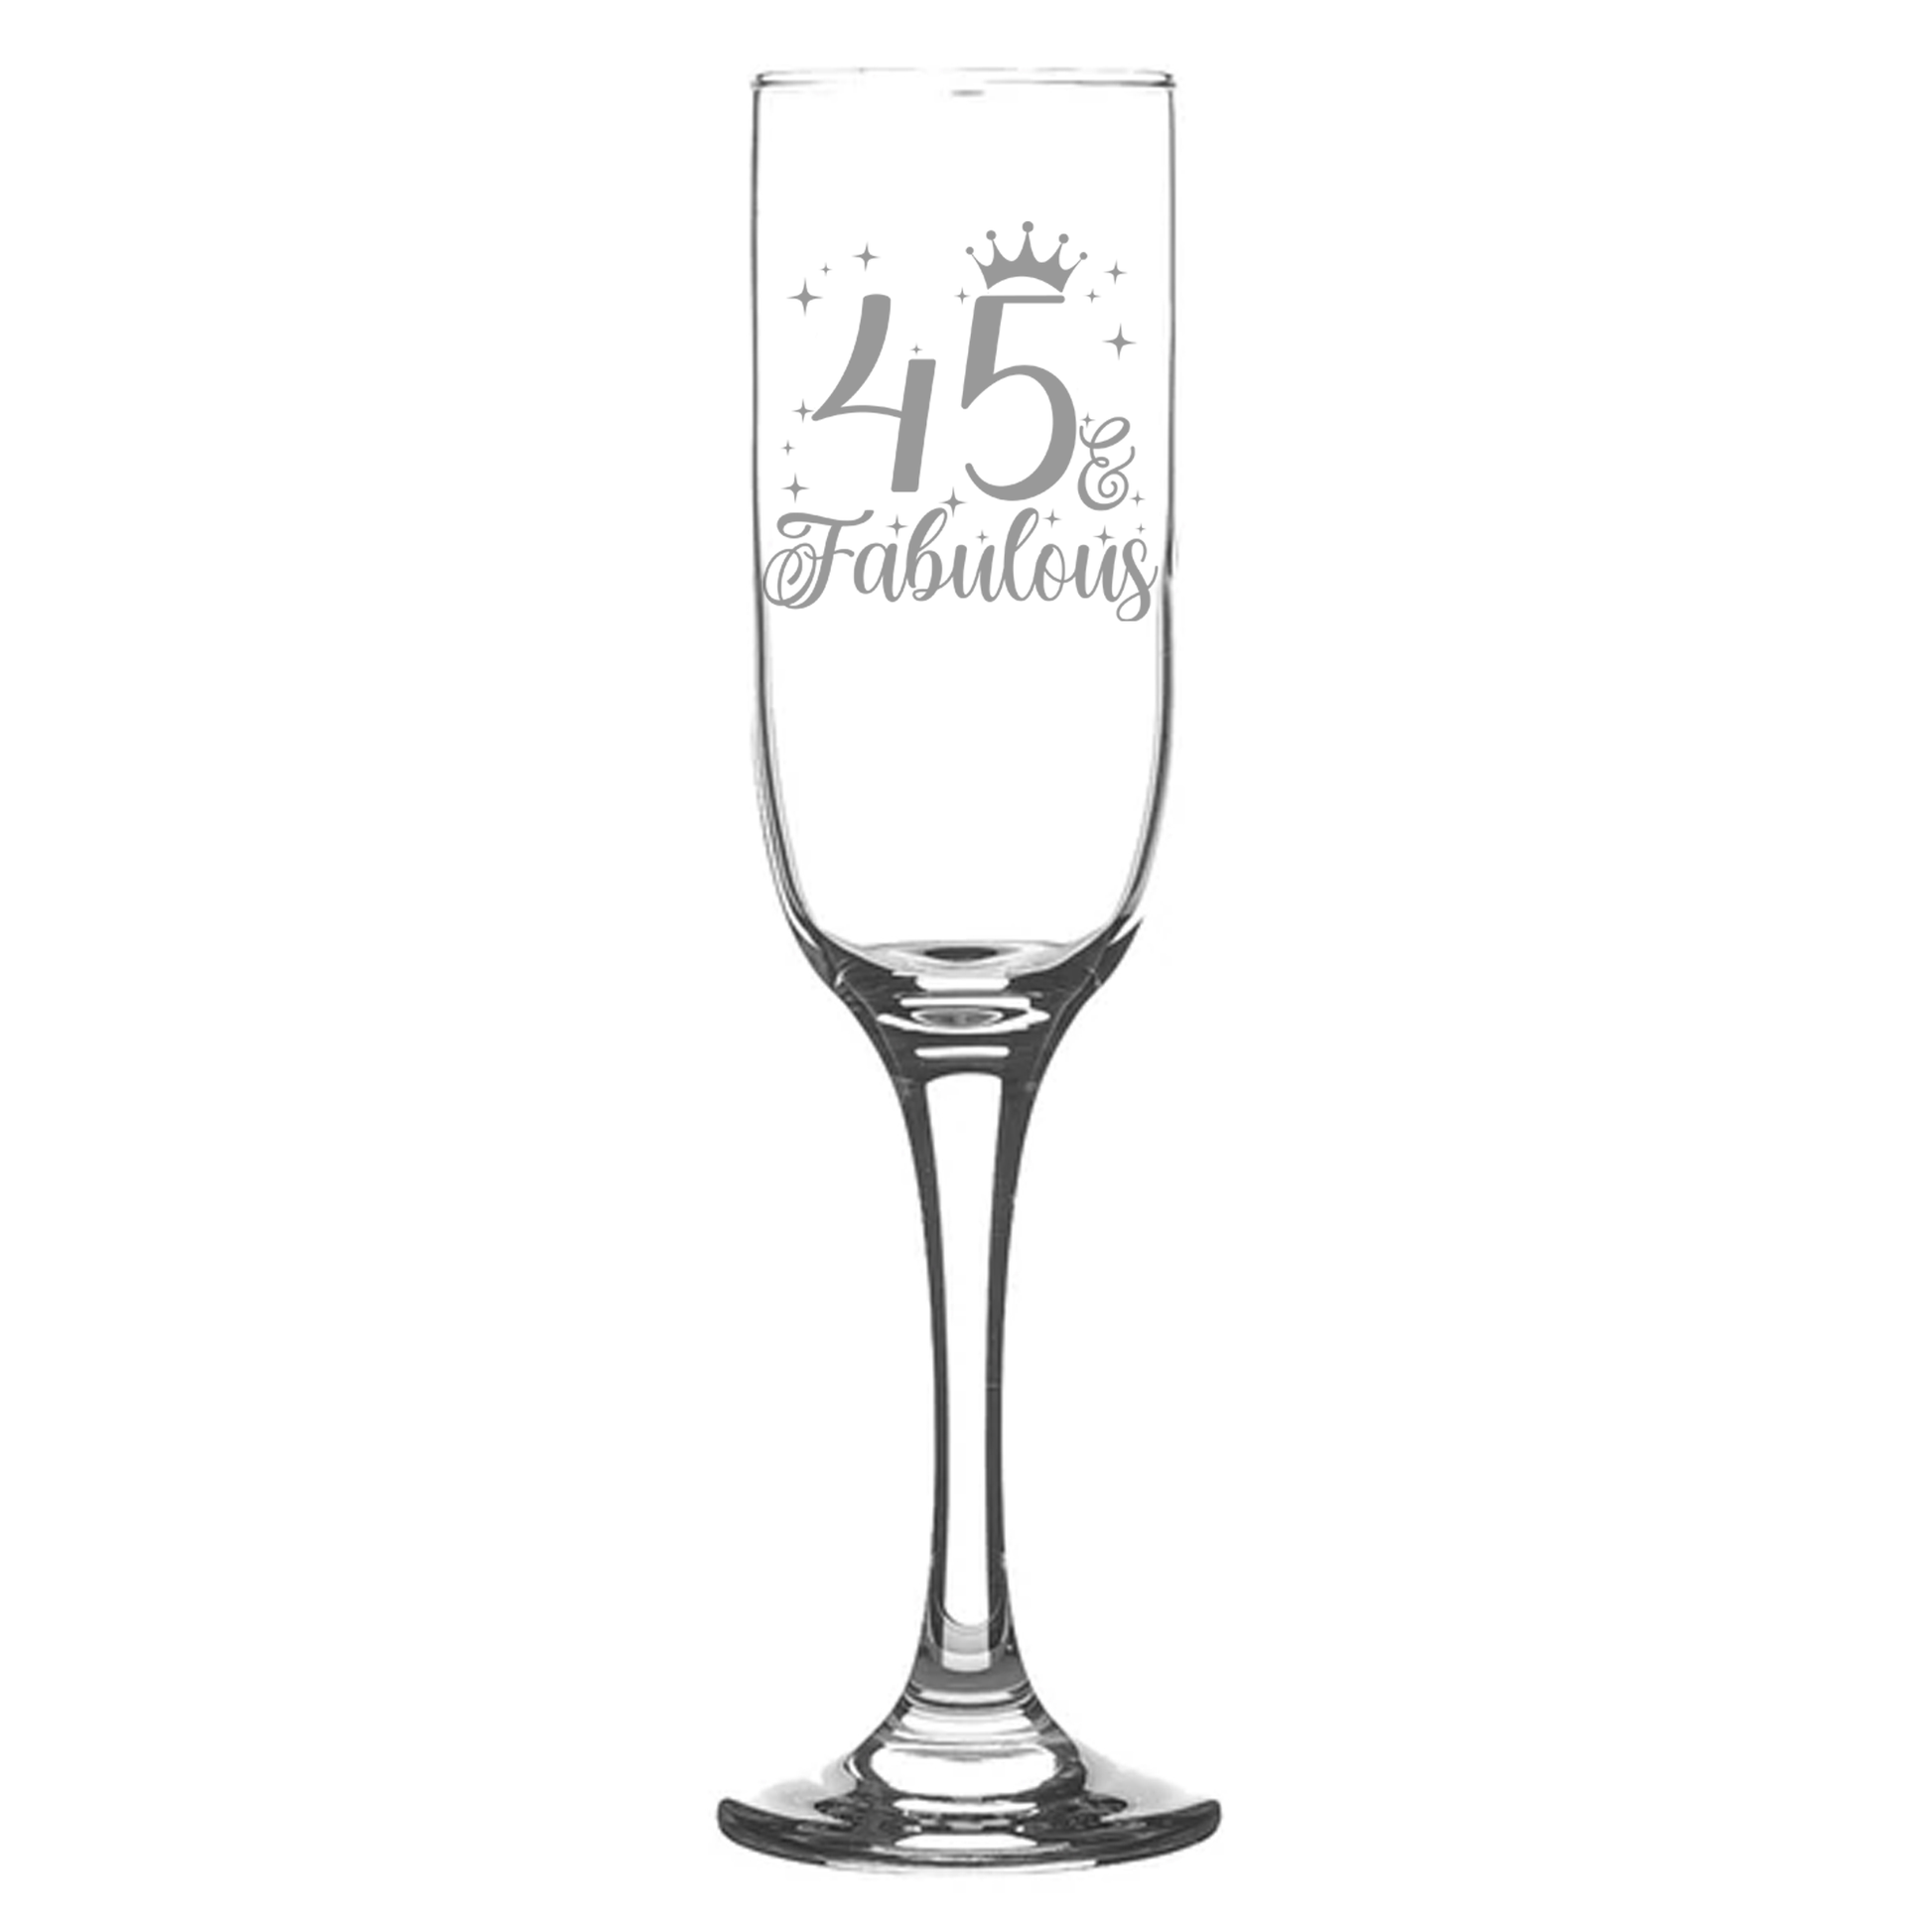 45 & Fabulous Engraved Champagne Glass and/or Coaster Set  - Always Looking Good - Champagne Glass On Its Own  